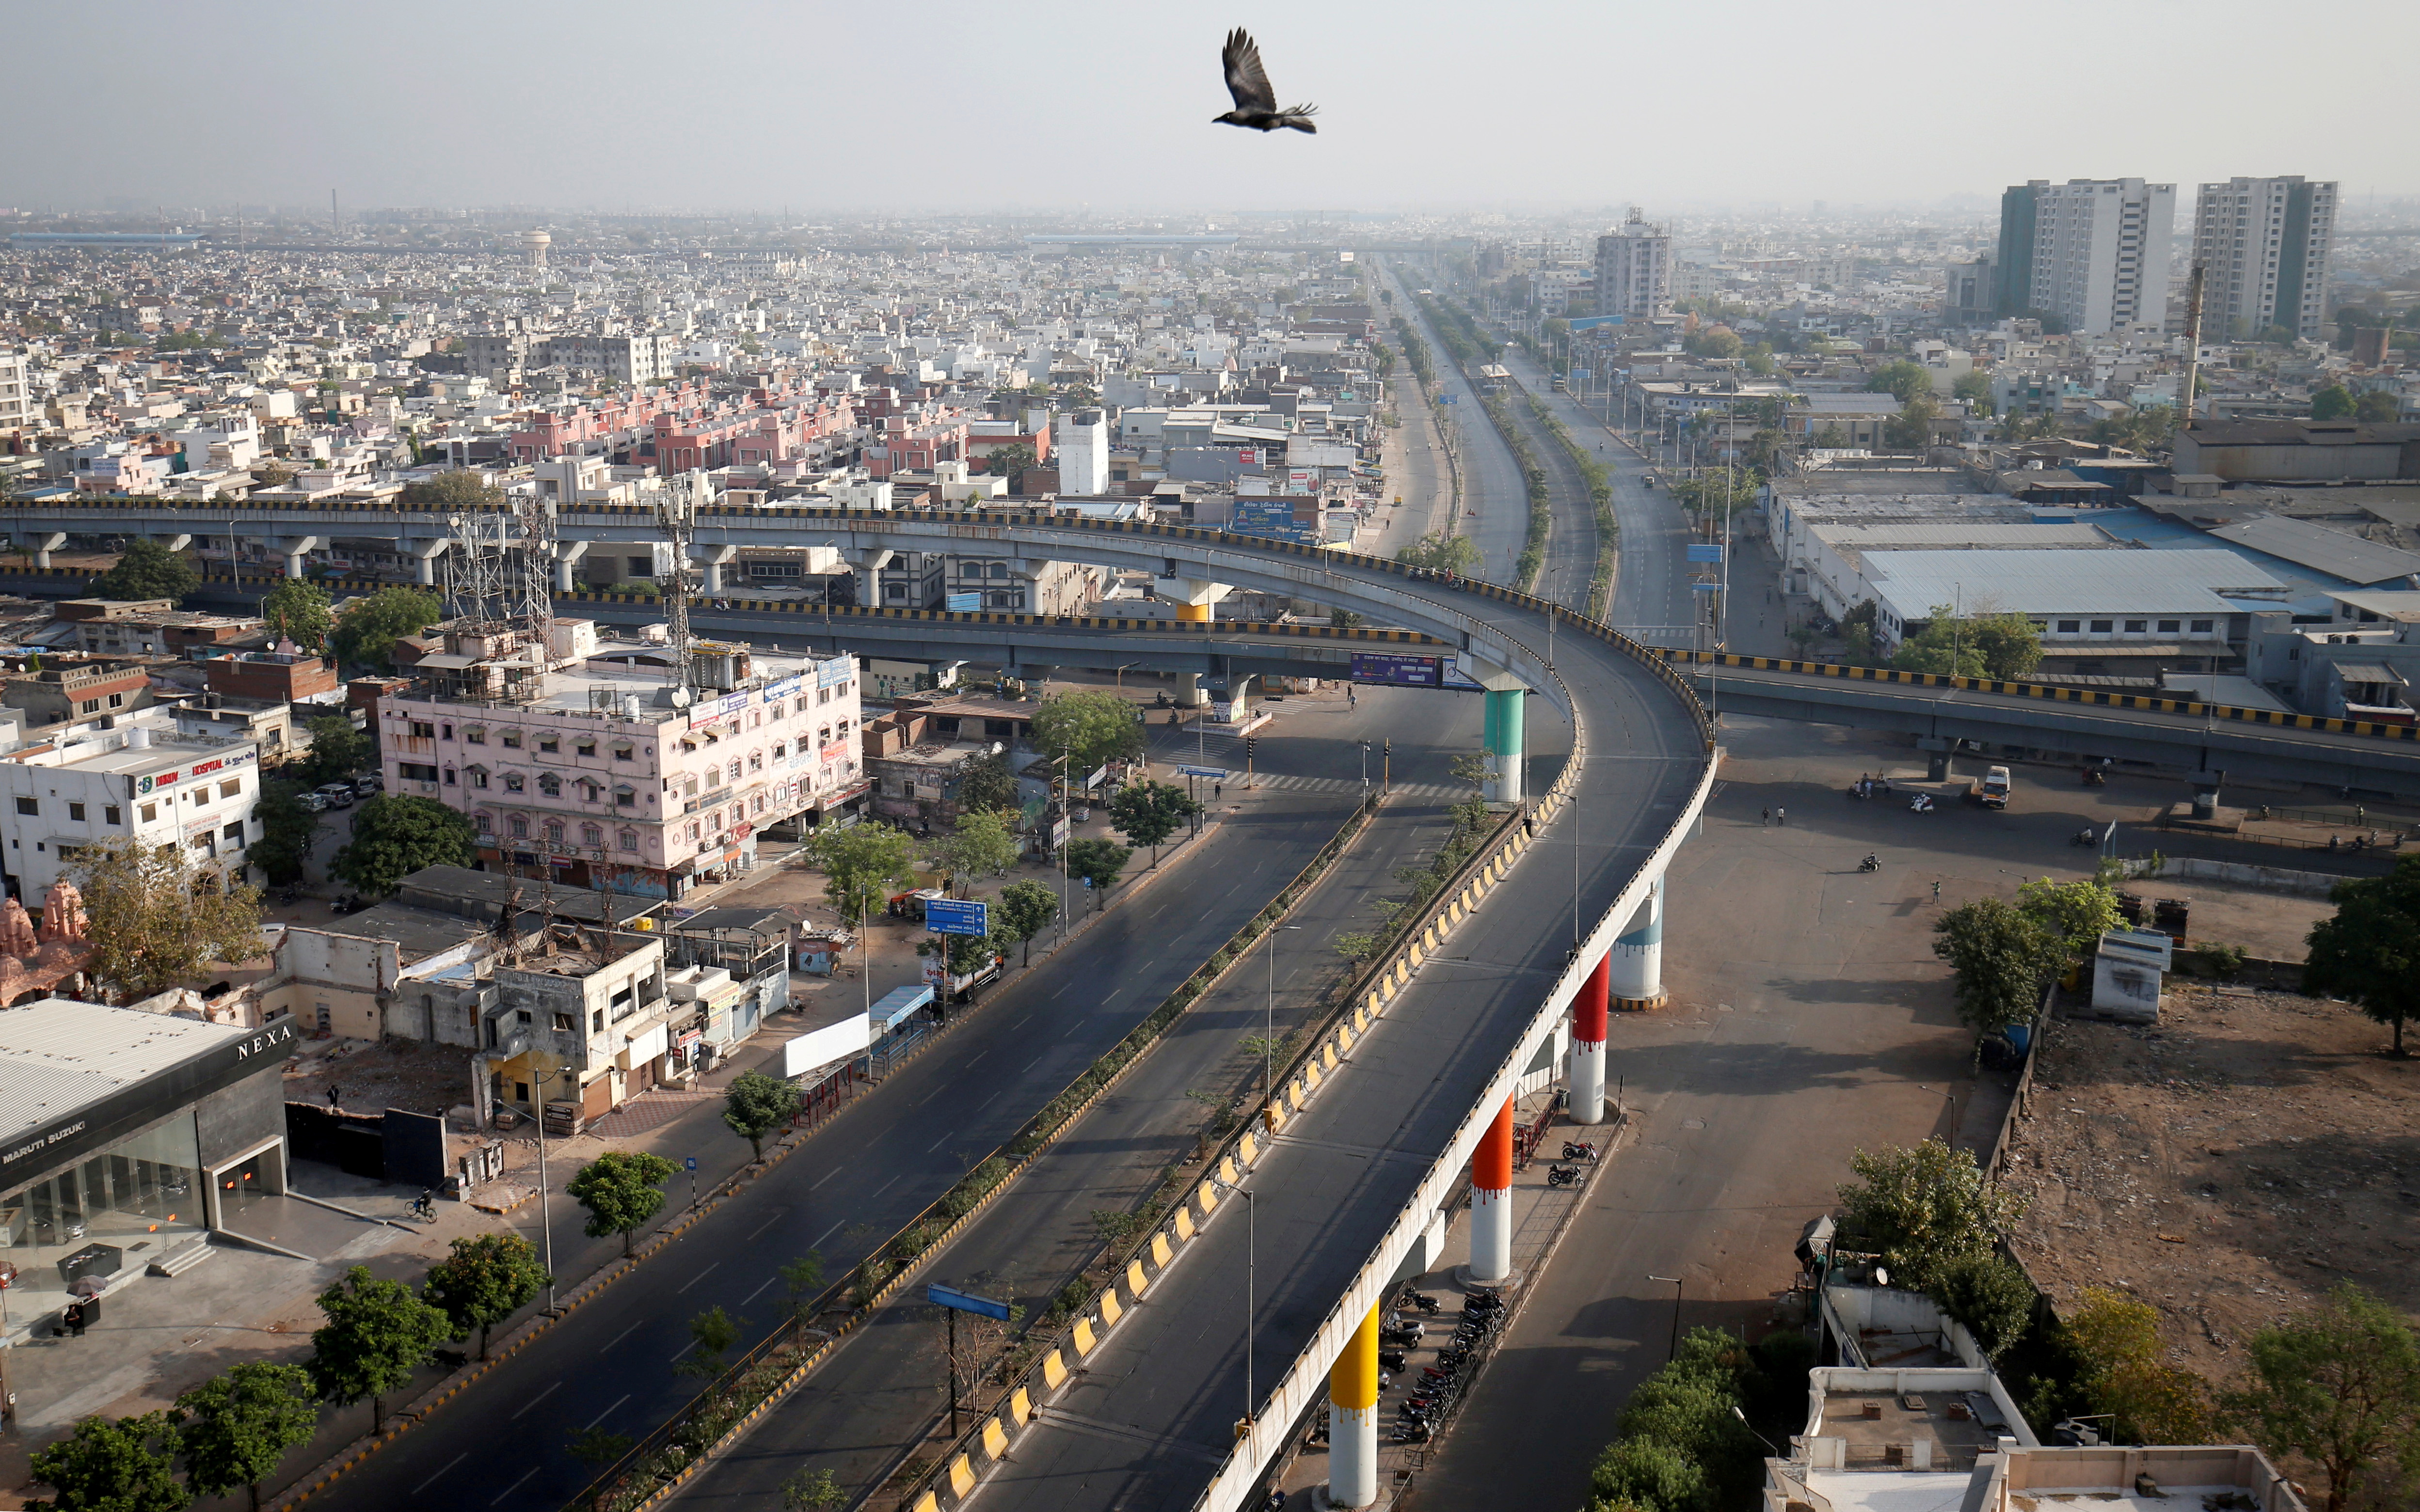 A view shows empty roads during a 14-hour long curfew to limit the spreading of coronavirus disease (COVID-19) in the country, in Ahmedabad, India, March 22, 2020. REUTERS/Amit Dave